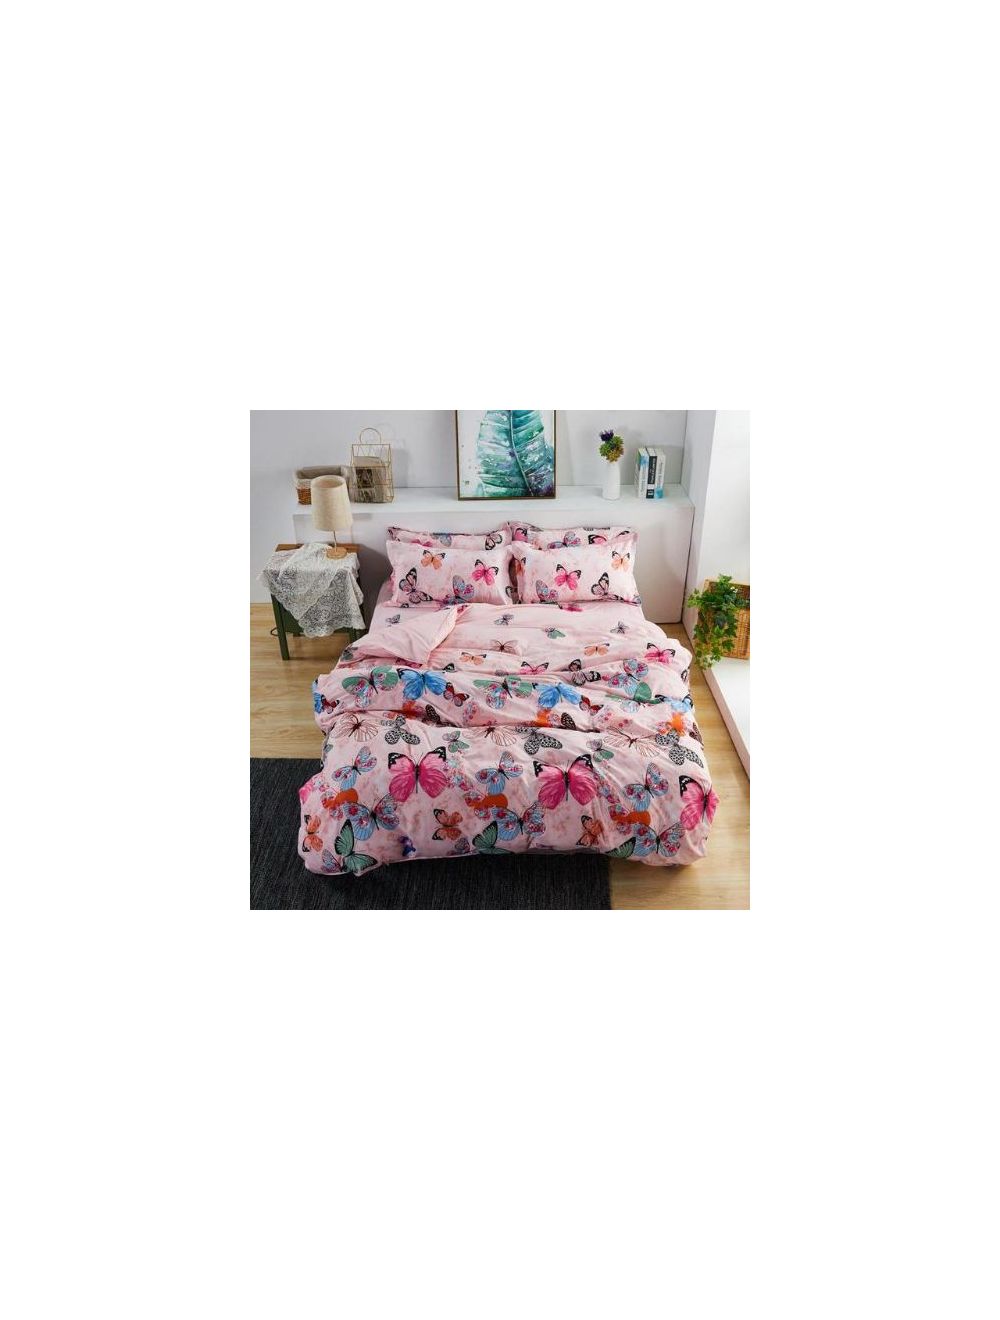 DEALS FOR LESS - Single Size, Duvet Cover, Bedding Set Of 4 Pieces, Pink Butterfly Design, 1 Duvet Cover + 1 Fitted Bedsheet + 2 Pillow Covers.-hz15-01s